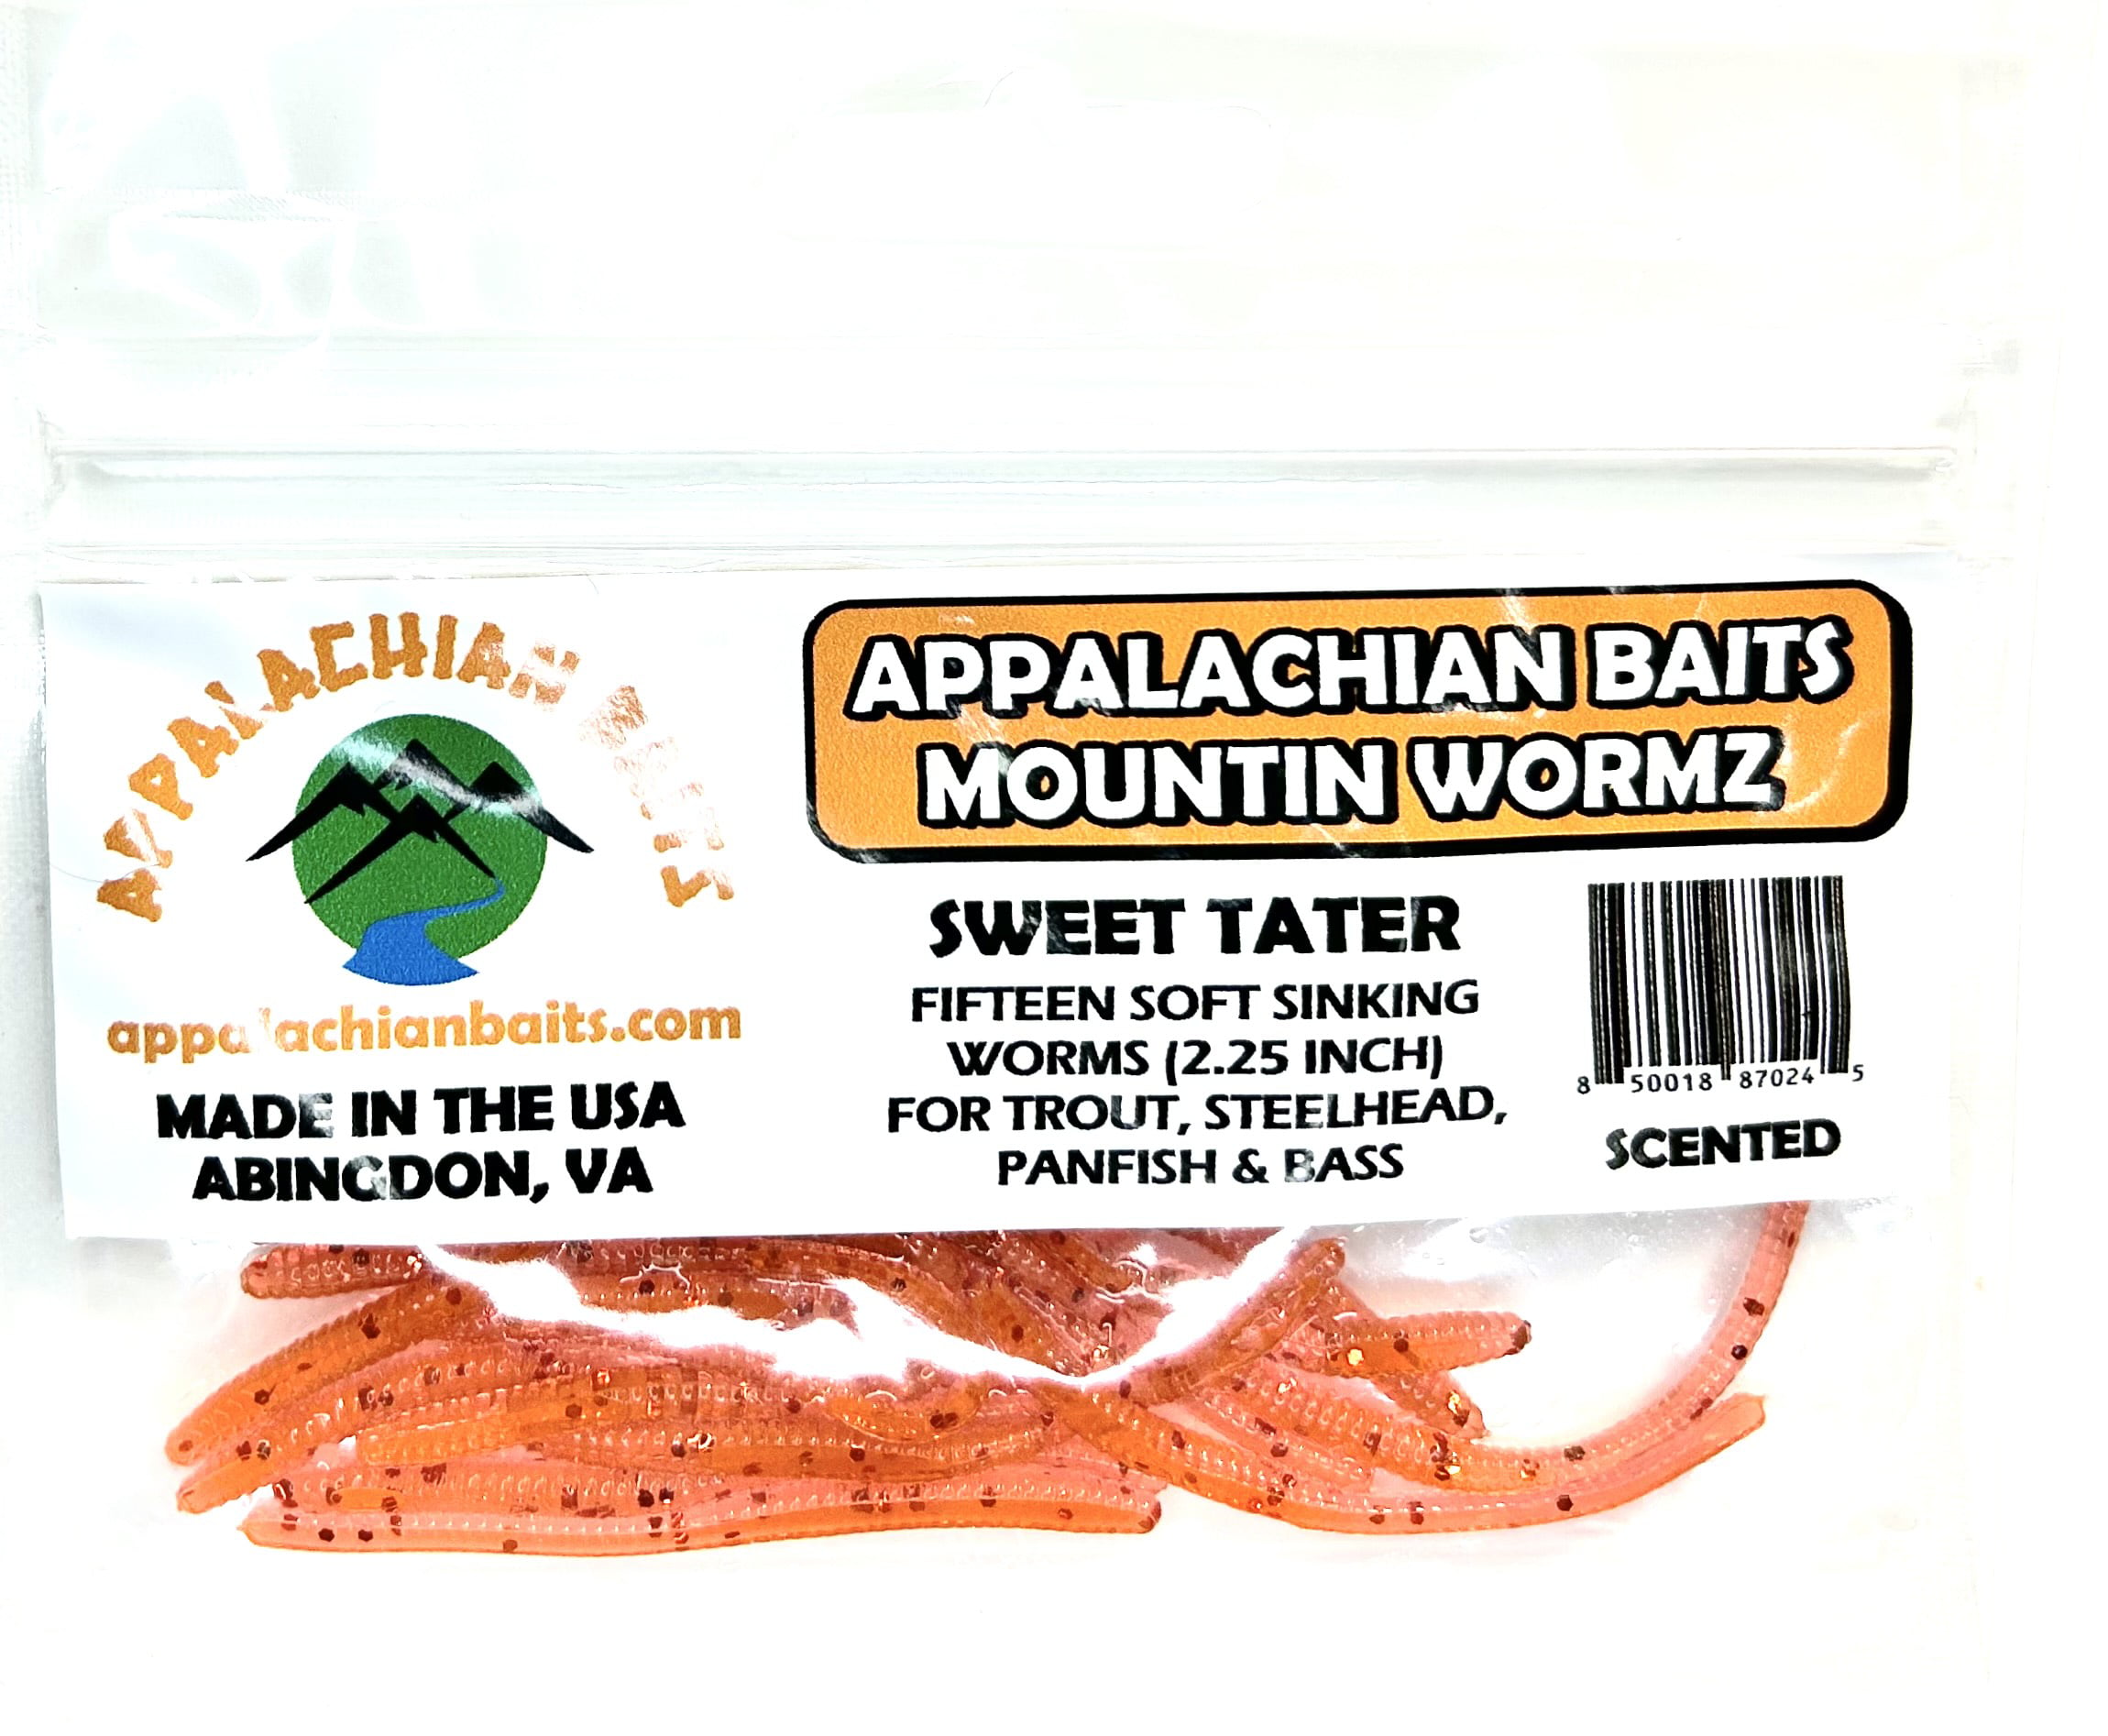 Appalachian Baits Mountin Wormz Sweet Tater 2 1/4 Soft Sinking Fishing  Bait Worms, Scented, 15 count